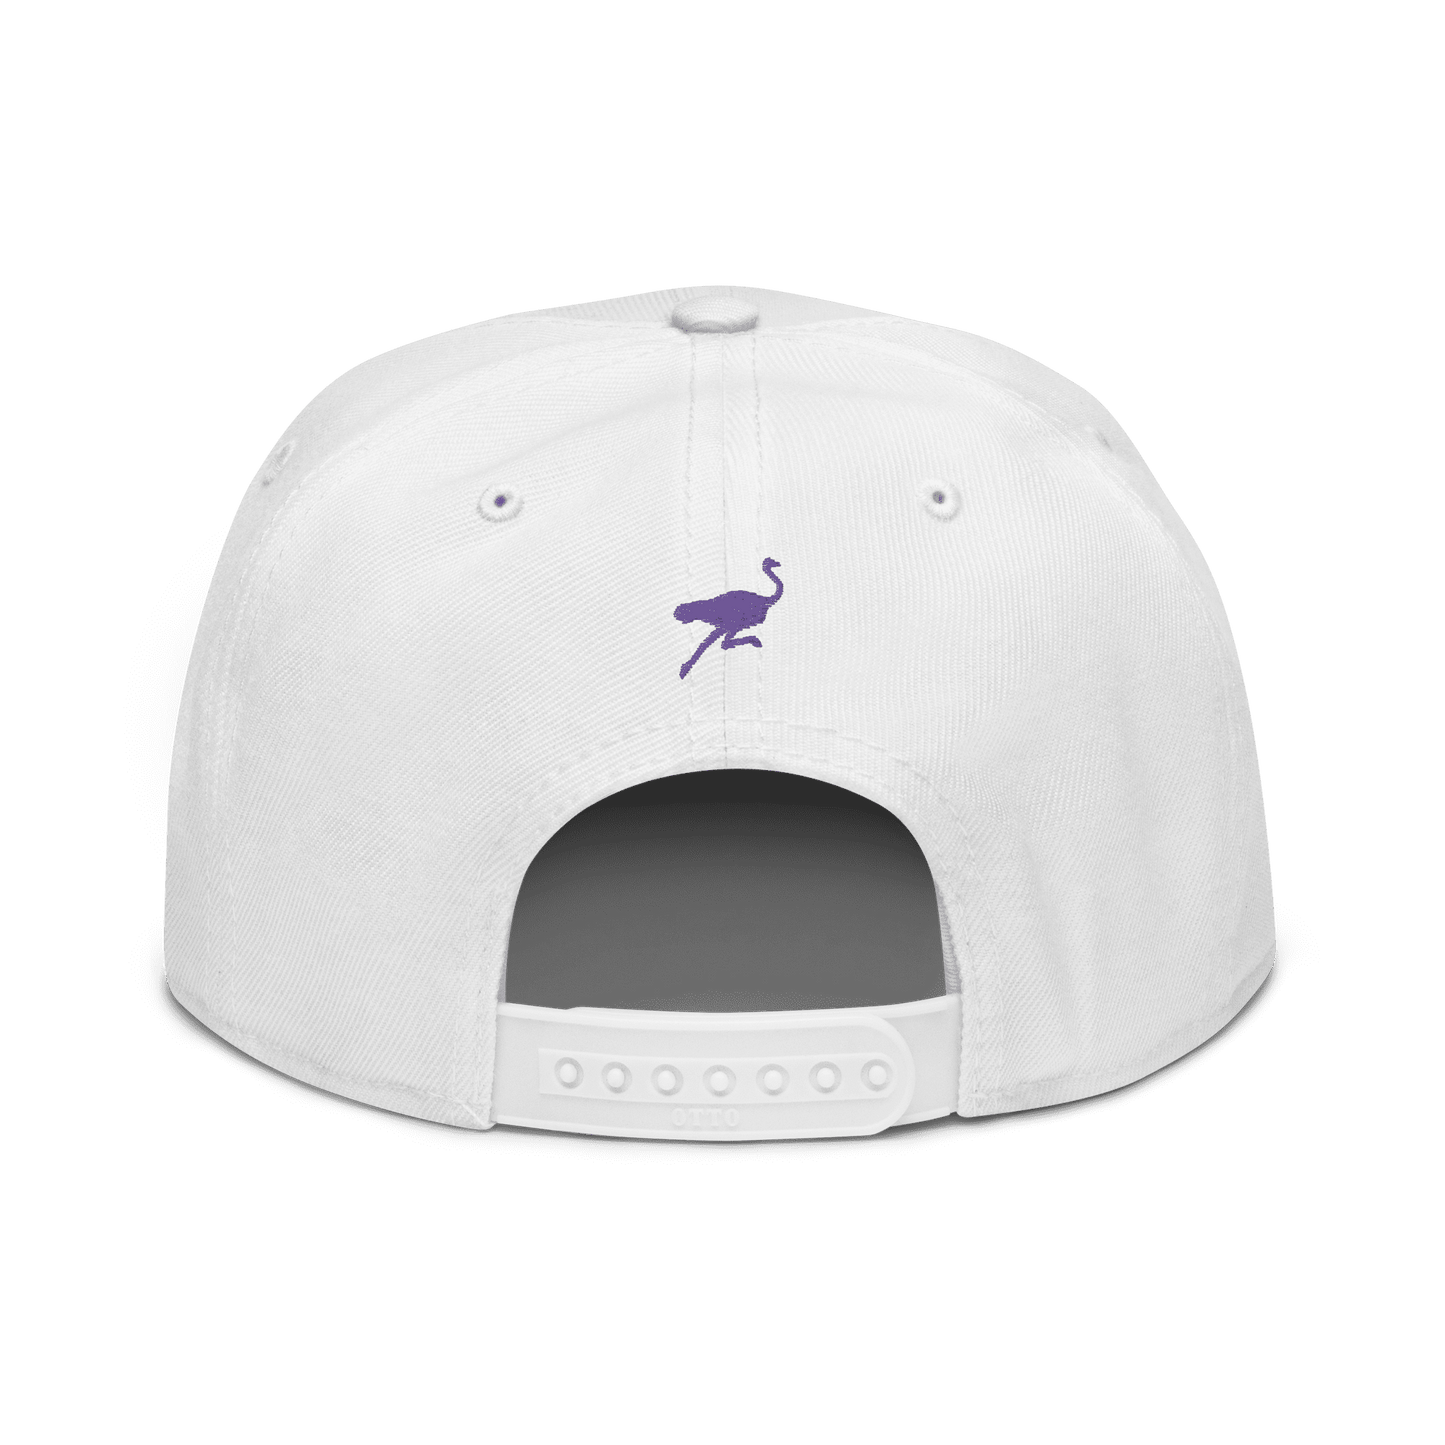 Back view of a white nostr snapback hat.